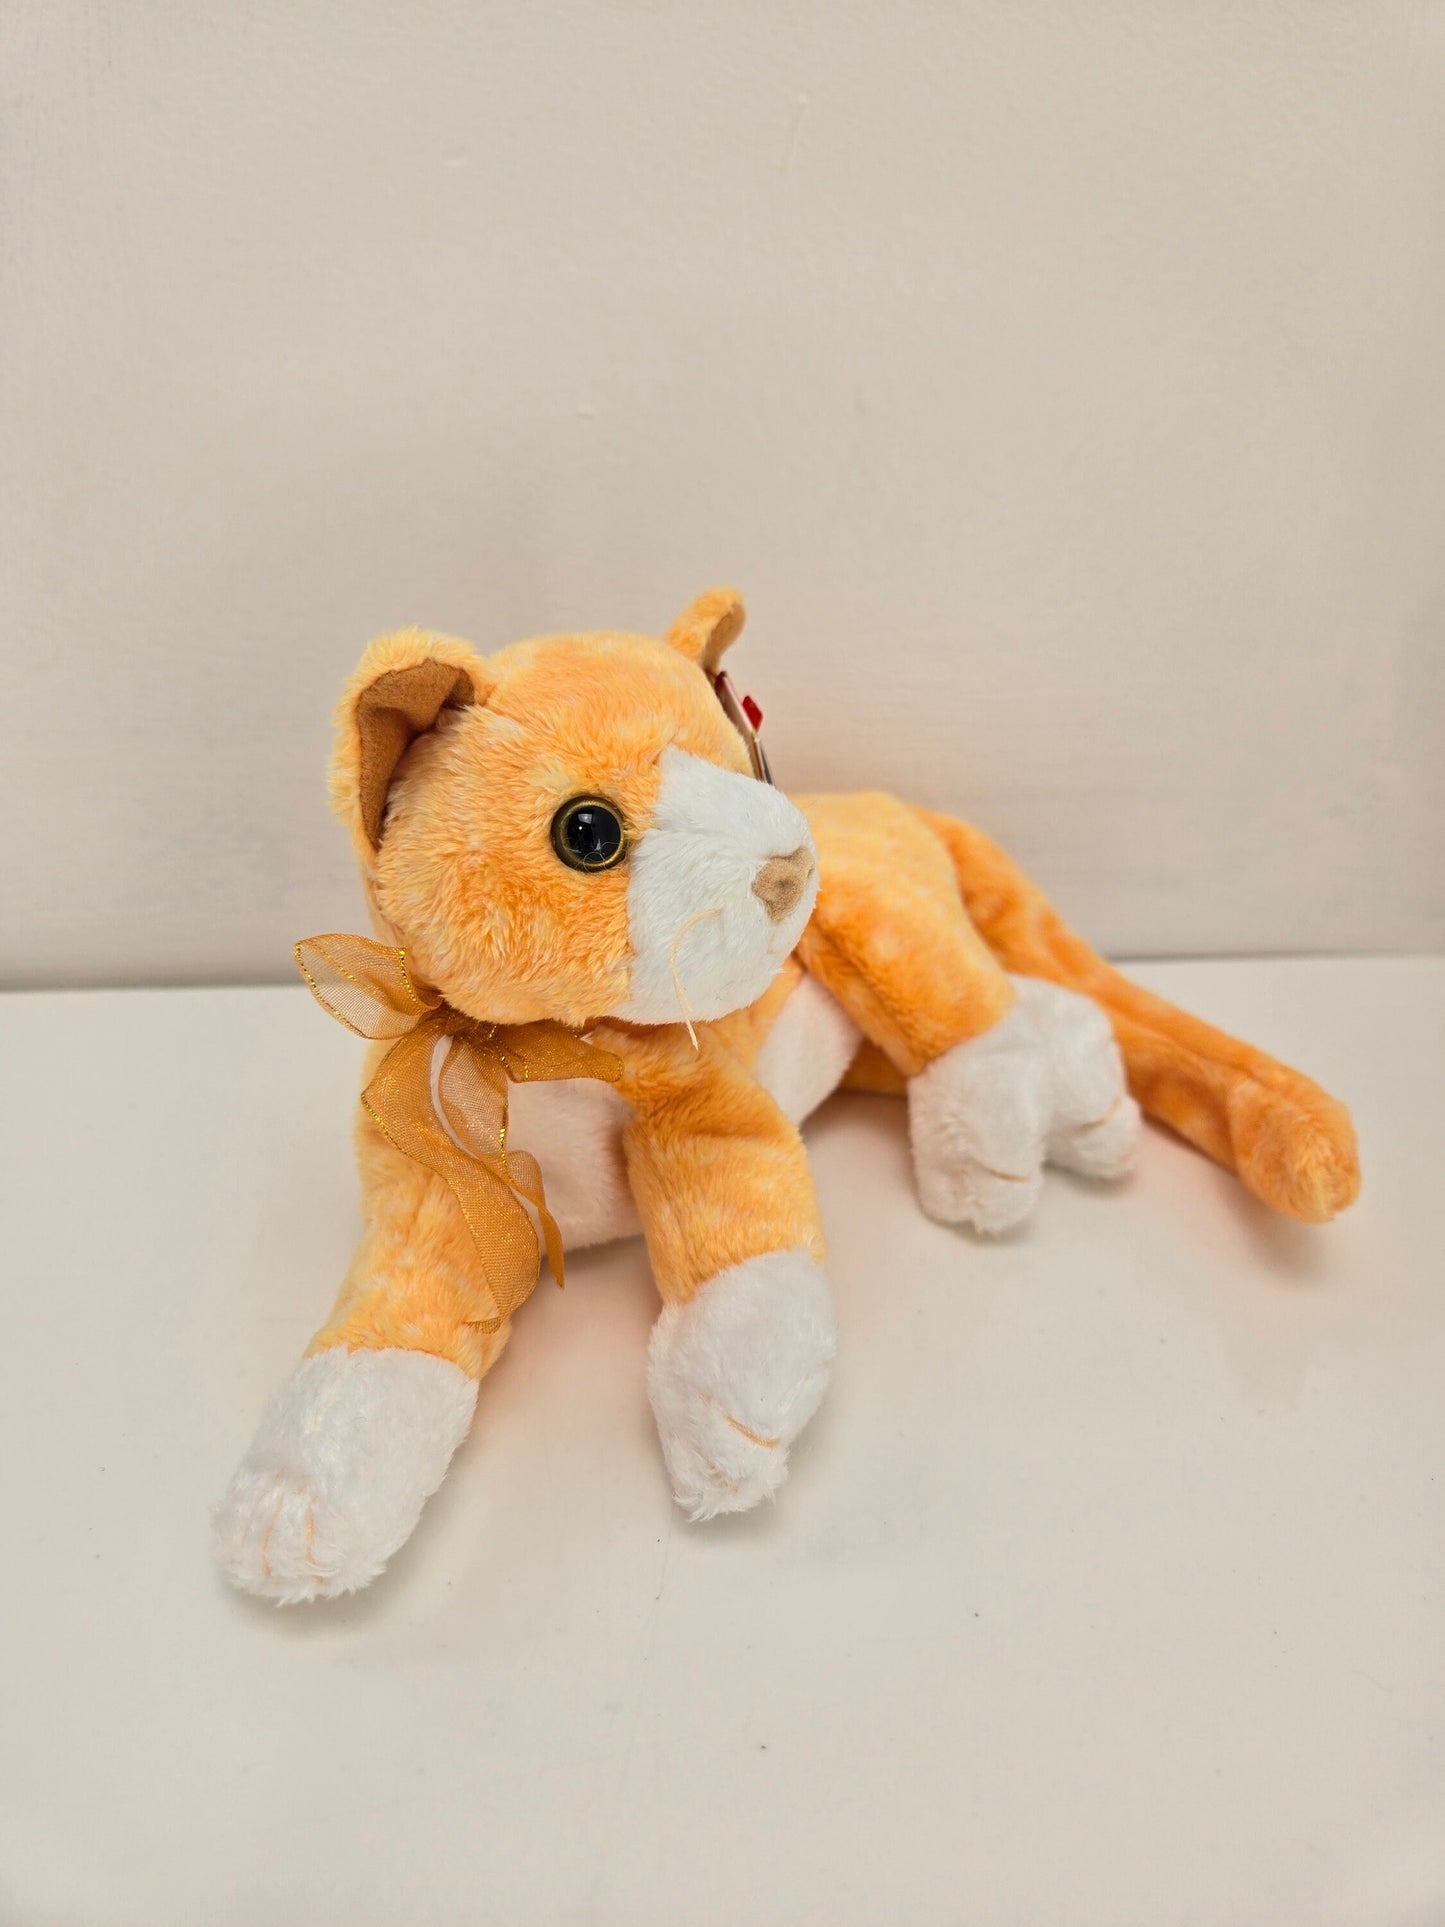 Ty Beanie Baby “Tabs” the Tabby Cat! (8 inch)